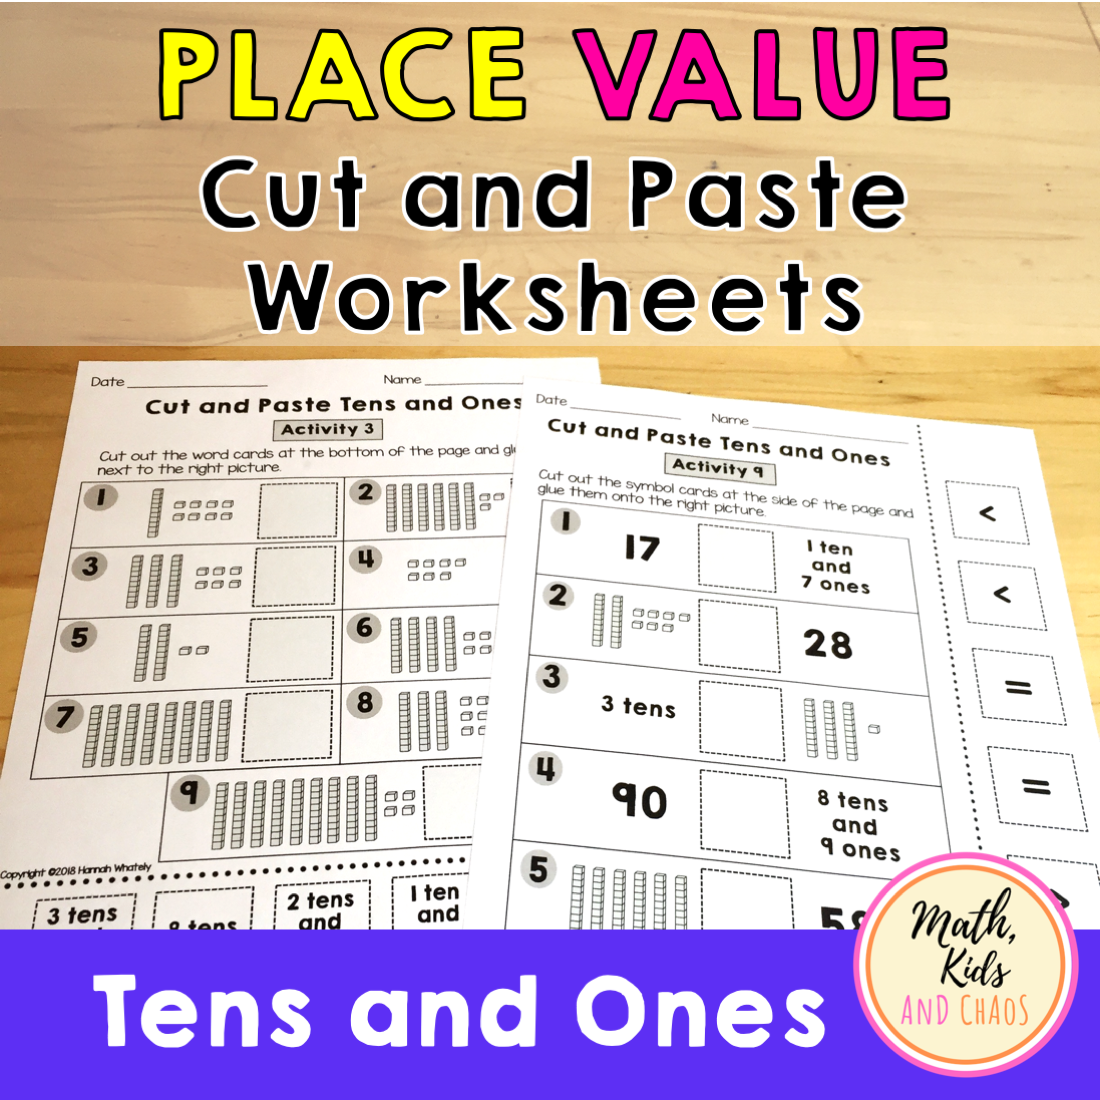 Place Value Cut and Paste Workseets (TENS and ONES)